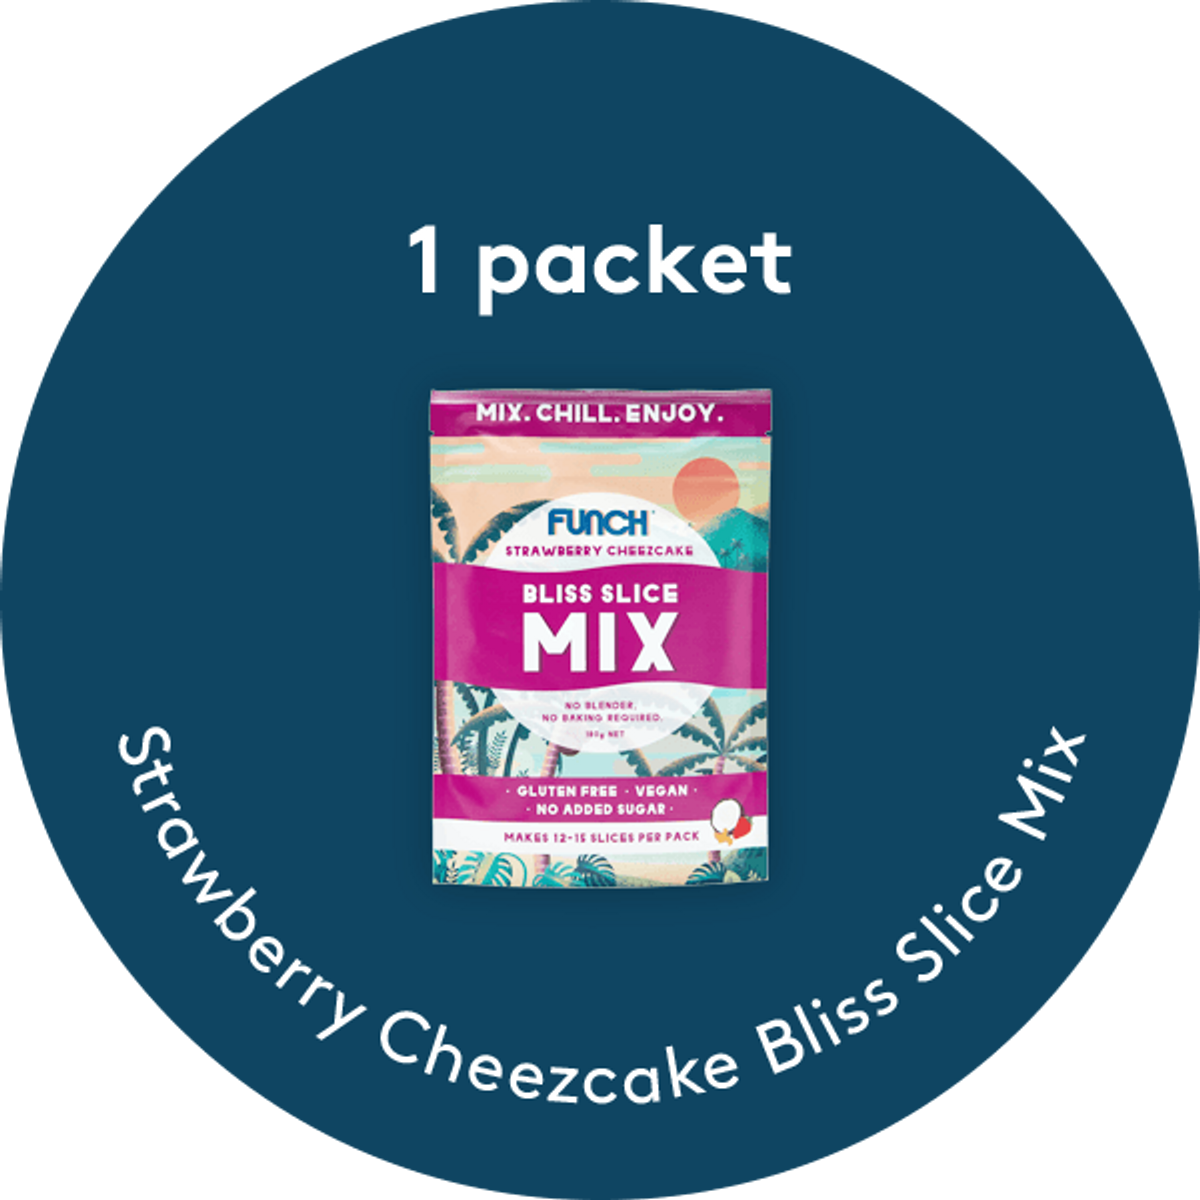 Strawberry Cheezcake Bliss Slice Mix Multipack